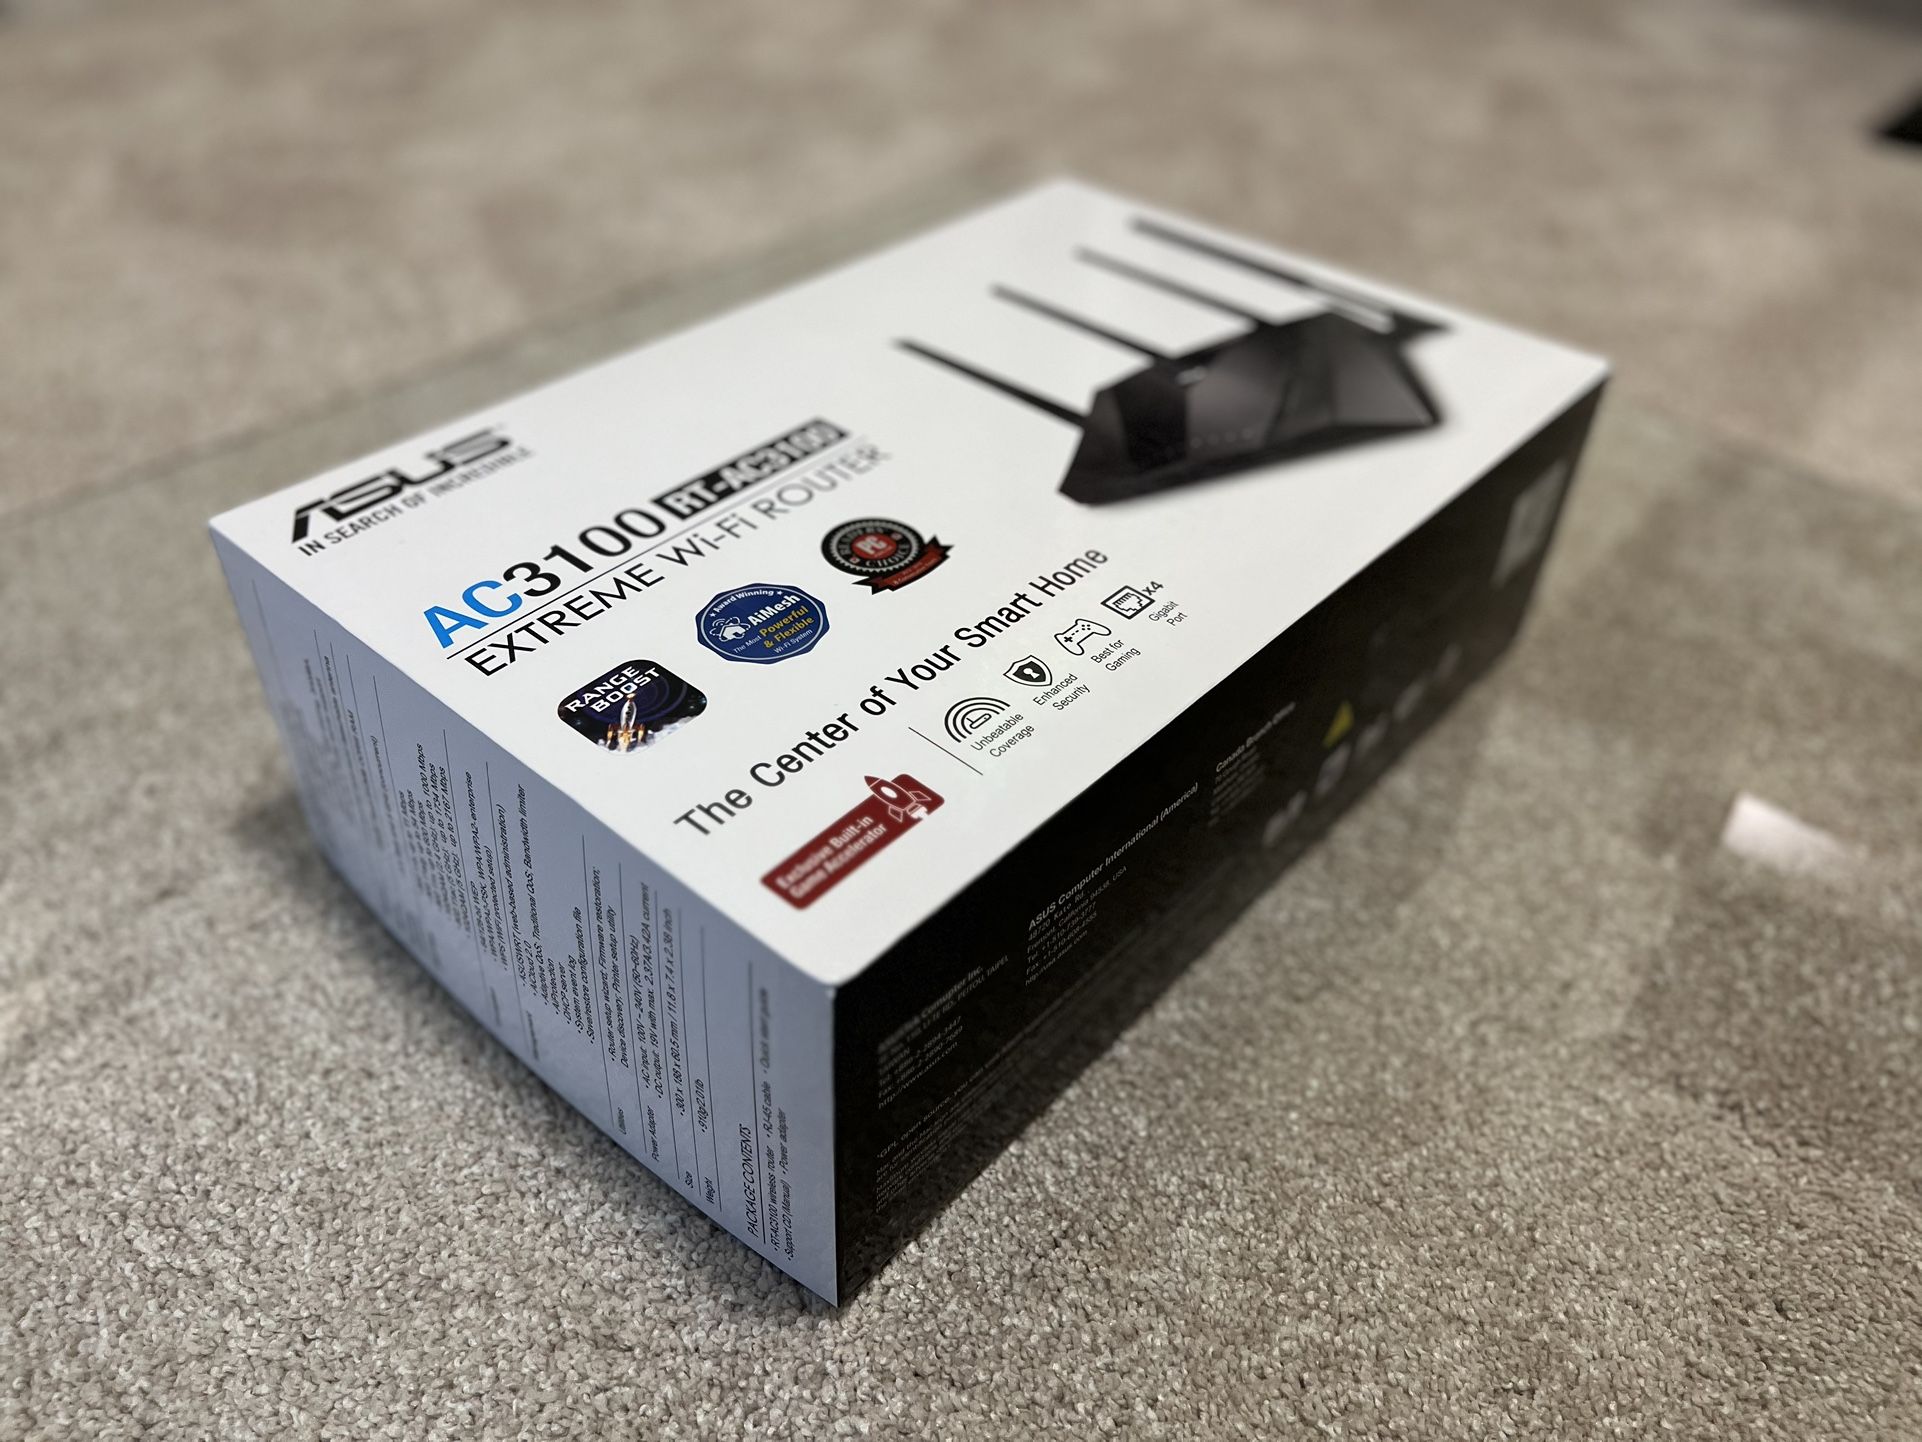 AC3100 ASUS Router (Original Packaging, Very Good Condition)